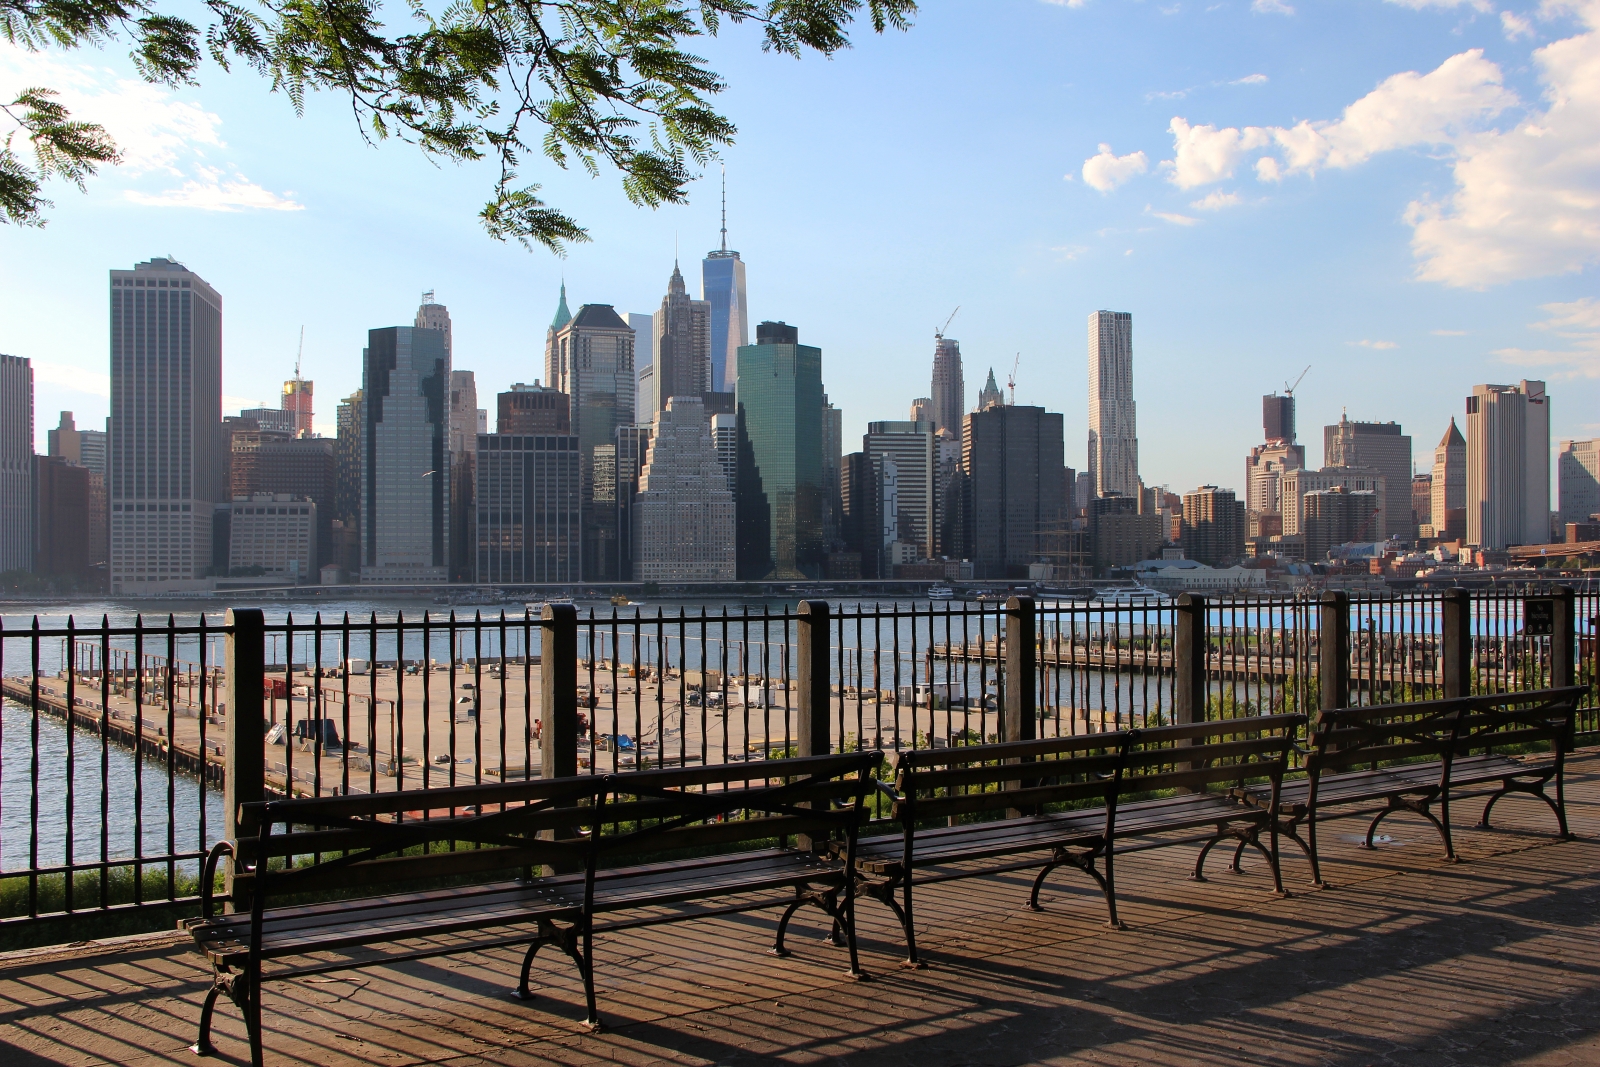 image of the Brooklyn Heights Promenade